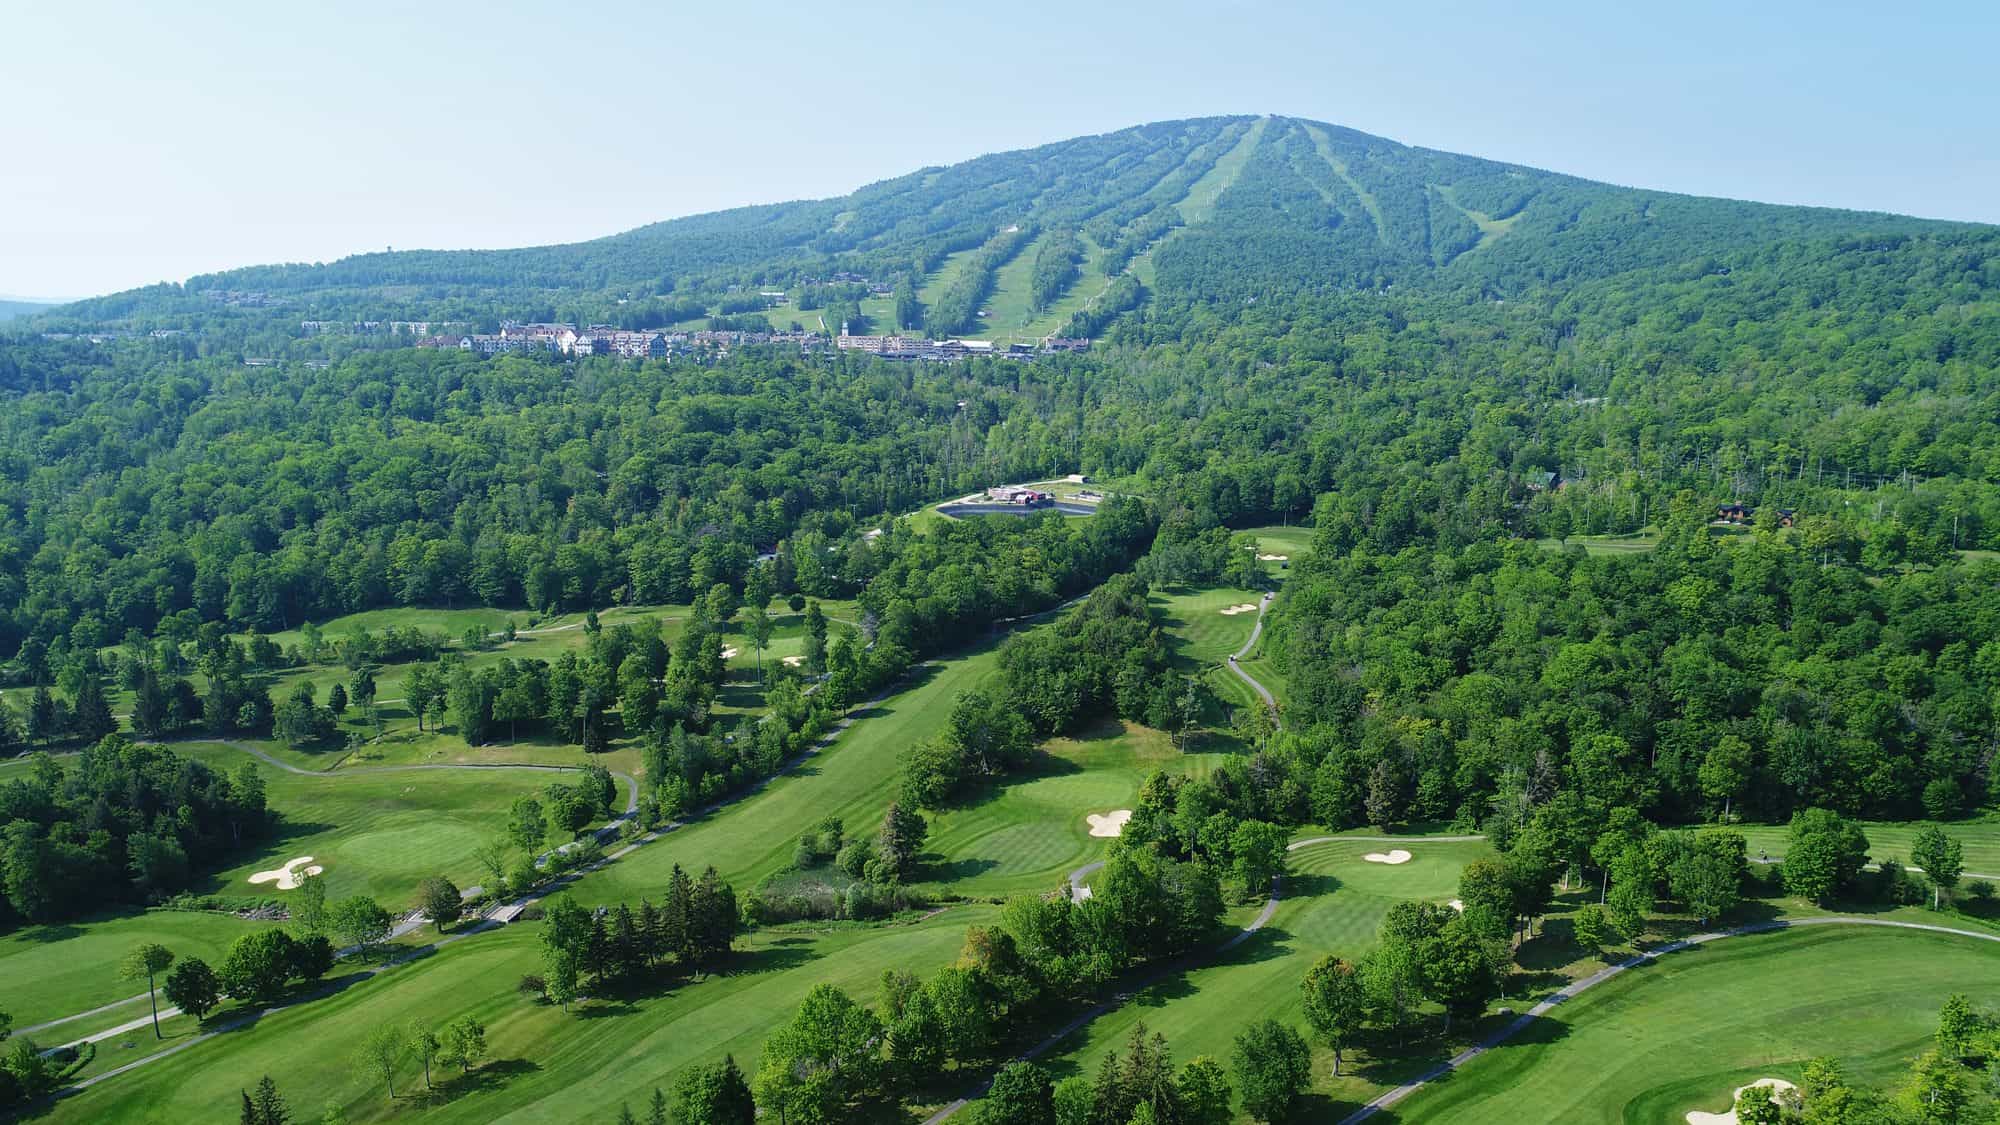 Stratton Mountain Resort Arial Golf Course in Green Summer